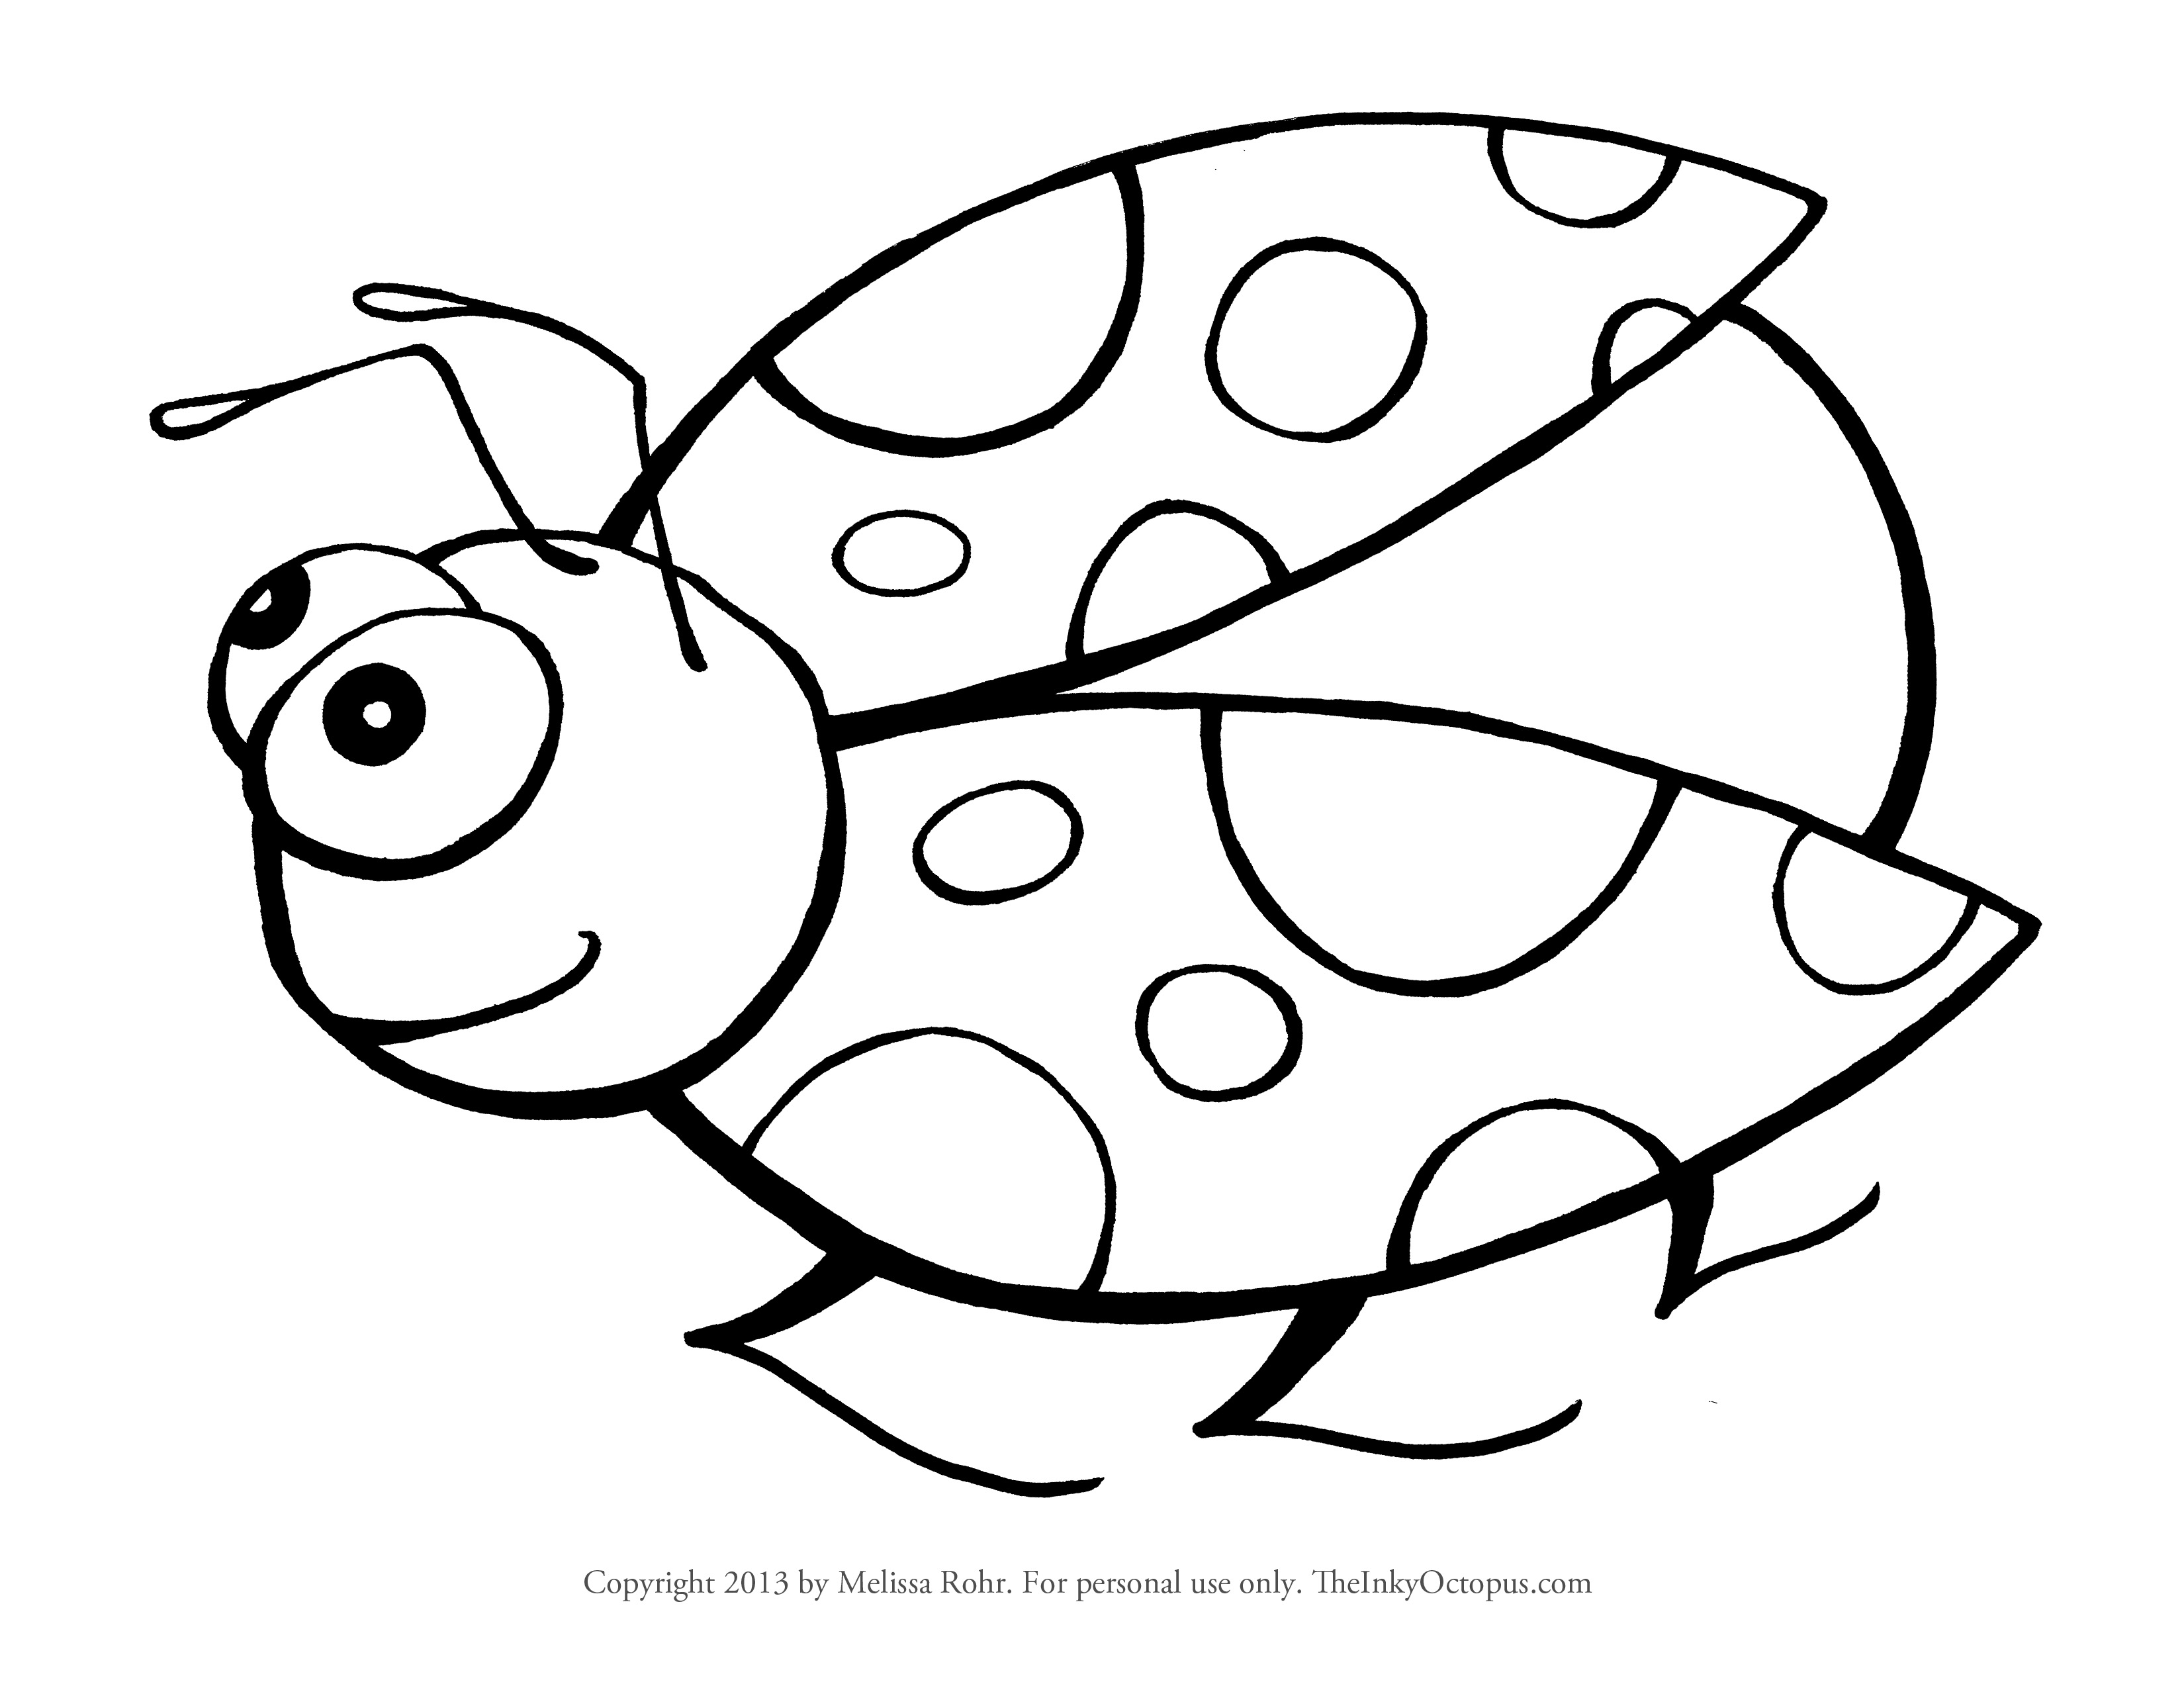 eric-carle-the-grouchy-ladybug-coloring-sheet-clip-art-library